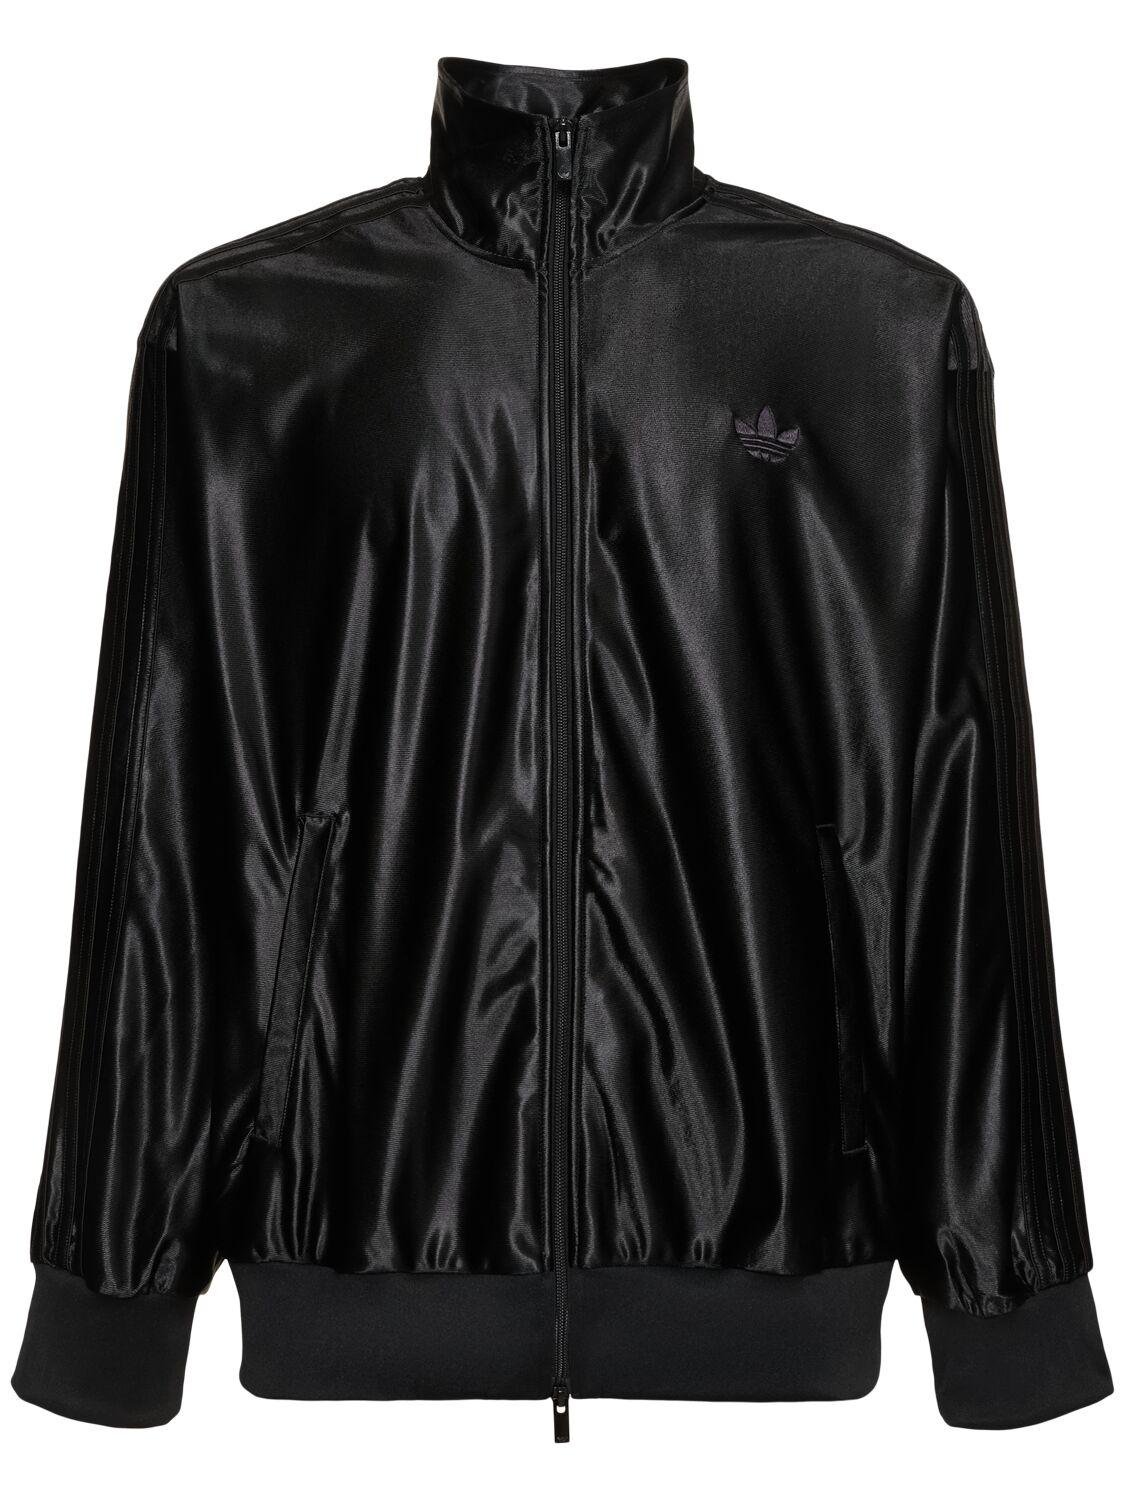 Tech Zip Track Top by ADIDAS